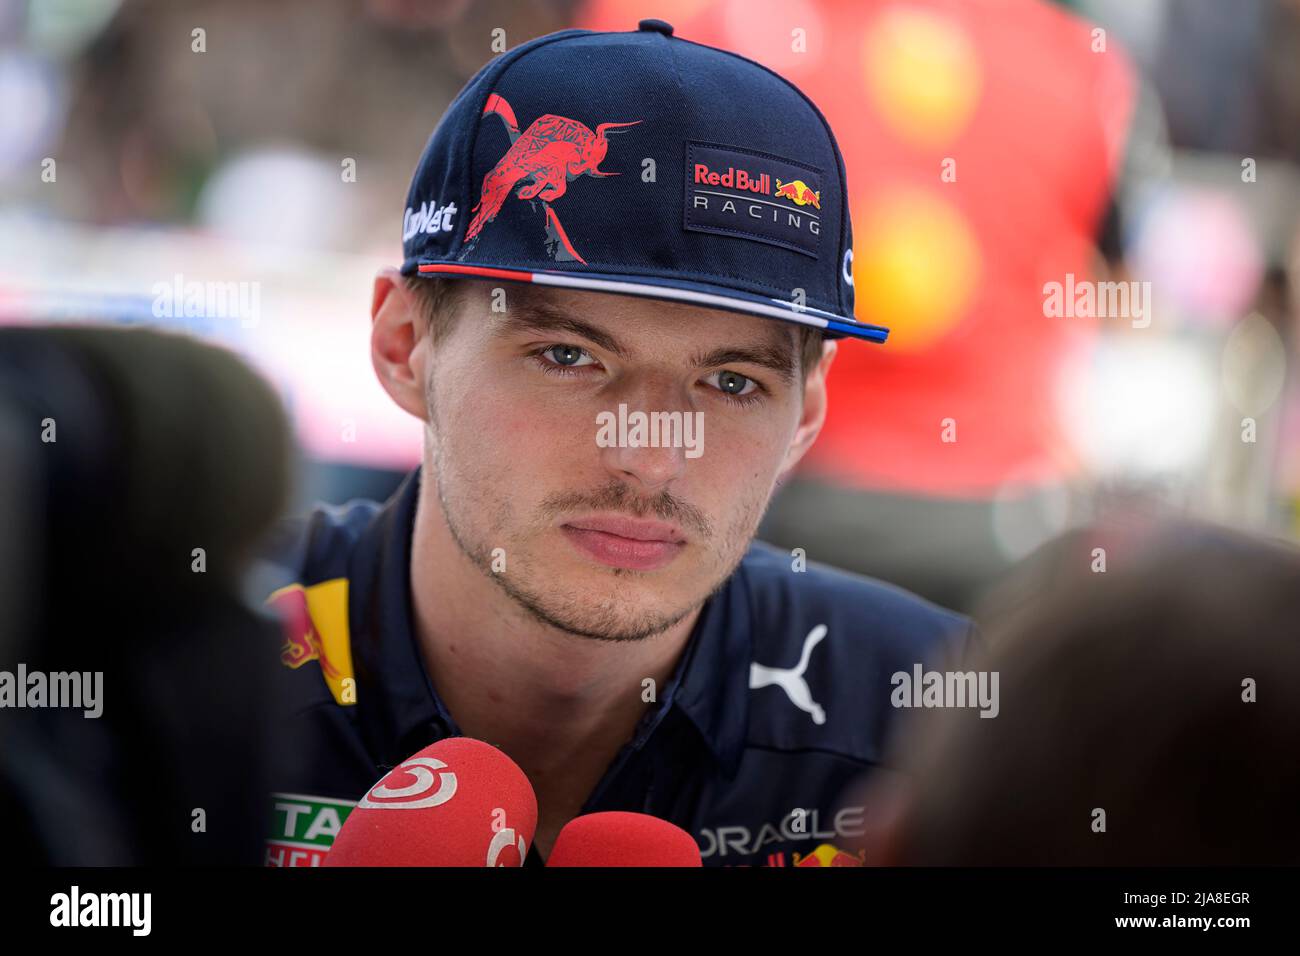 Oracle Red Bull Racing’s Dutch driver Max Verstappen speaks to the media prior to the start of the Monaco F1 Grand Prix weekend in Monaco. Stock Photo